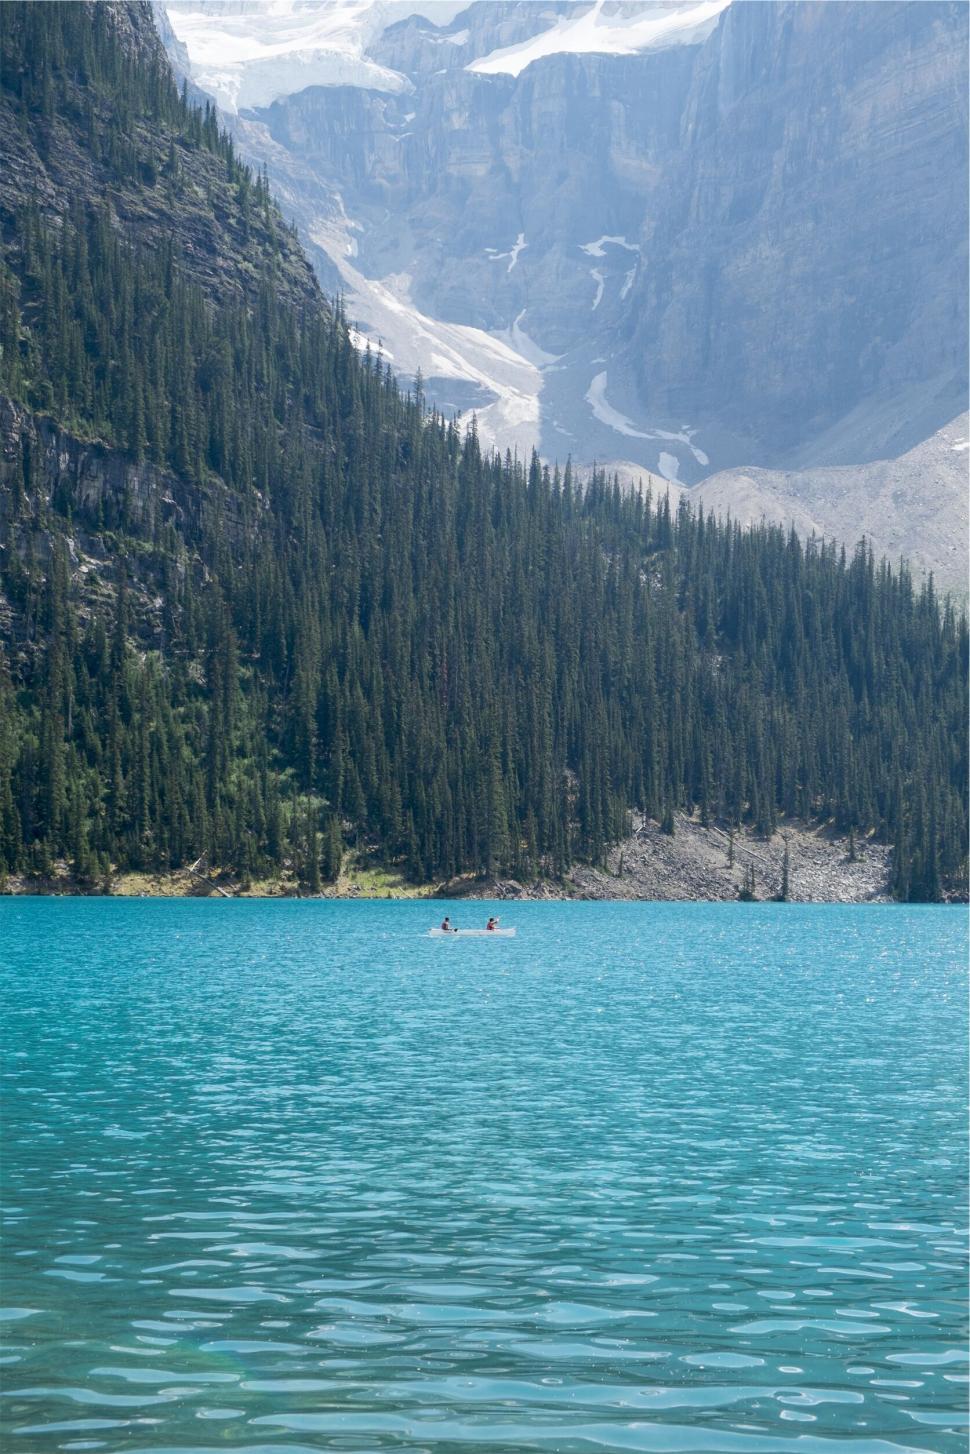 Free Image of Kayakers on a turquoise mountain lake 